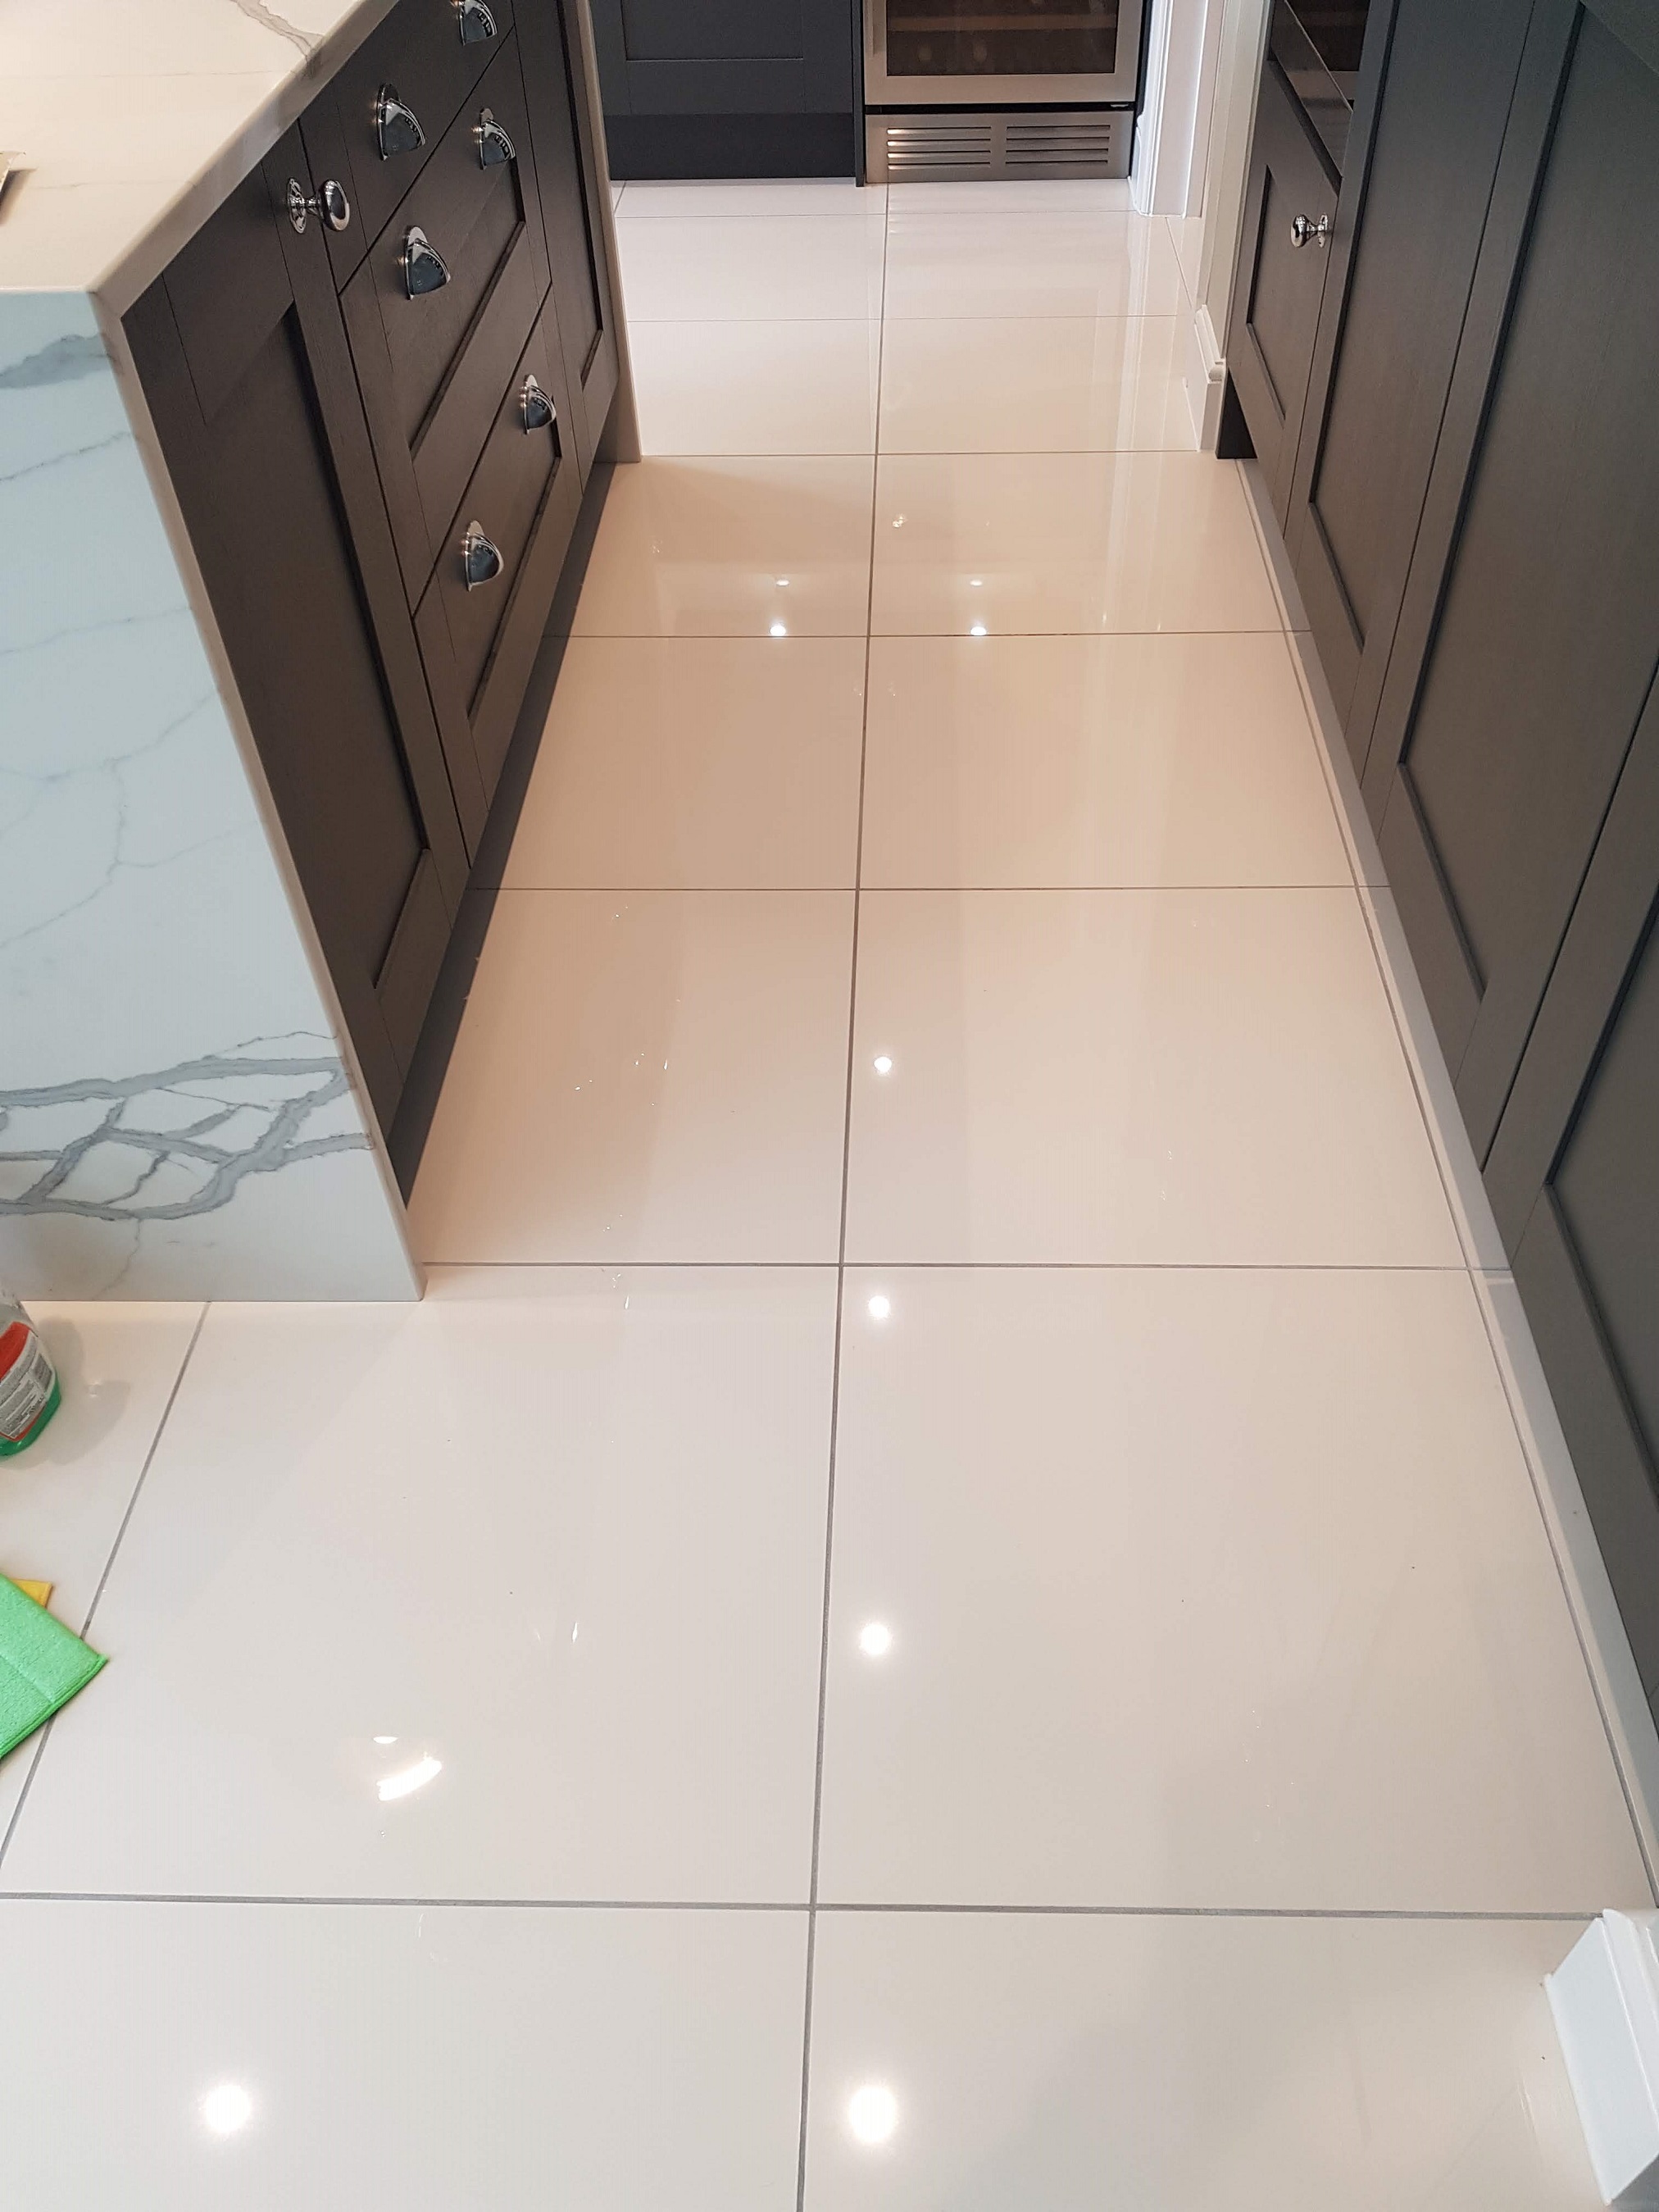 Changing Grout Colour Used On New Porcelain Tile Installation In East Cheshire Tiling Tips Tips And Information About Tiling,Homemade Rib Rub Recipe